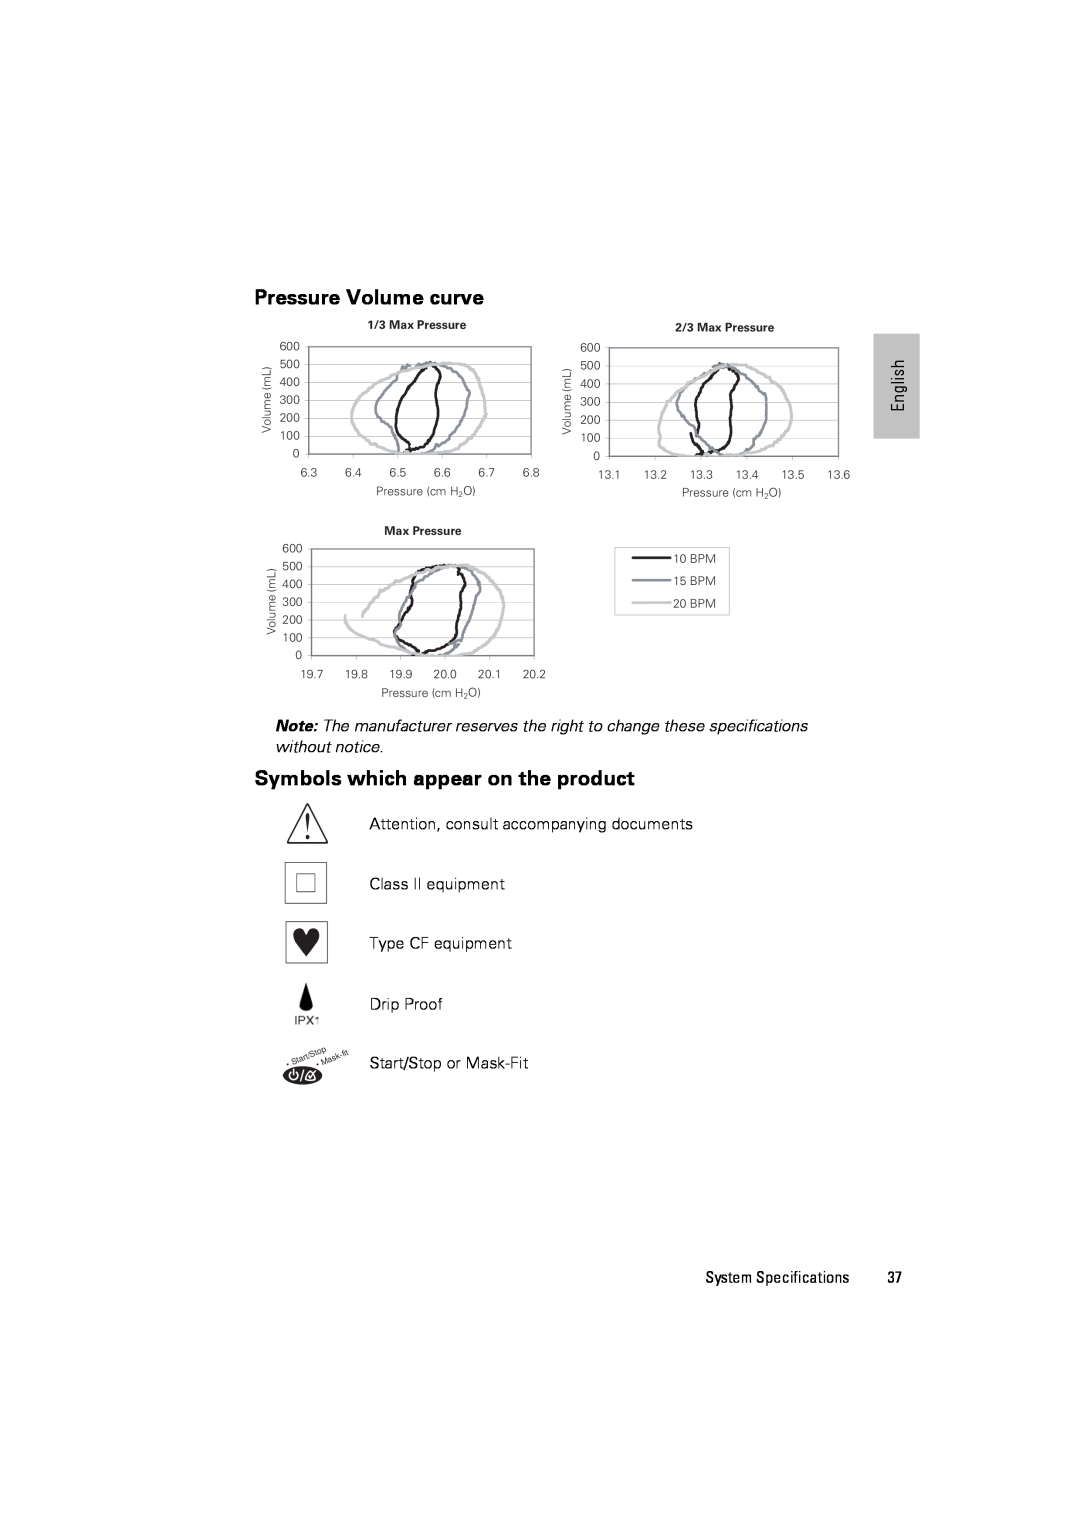 ResMed III & III ST Pressure Volume curve, Symbols which appear on the product, Attention, consult accompanying documents 